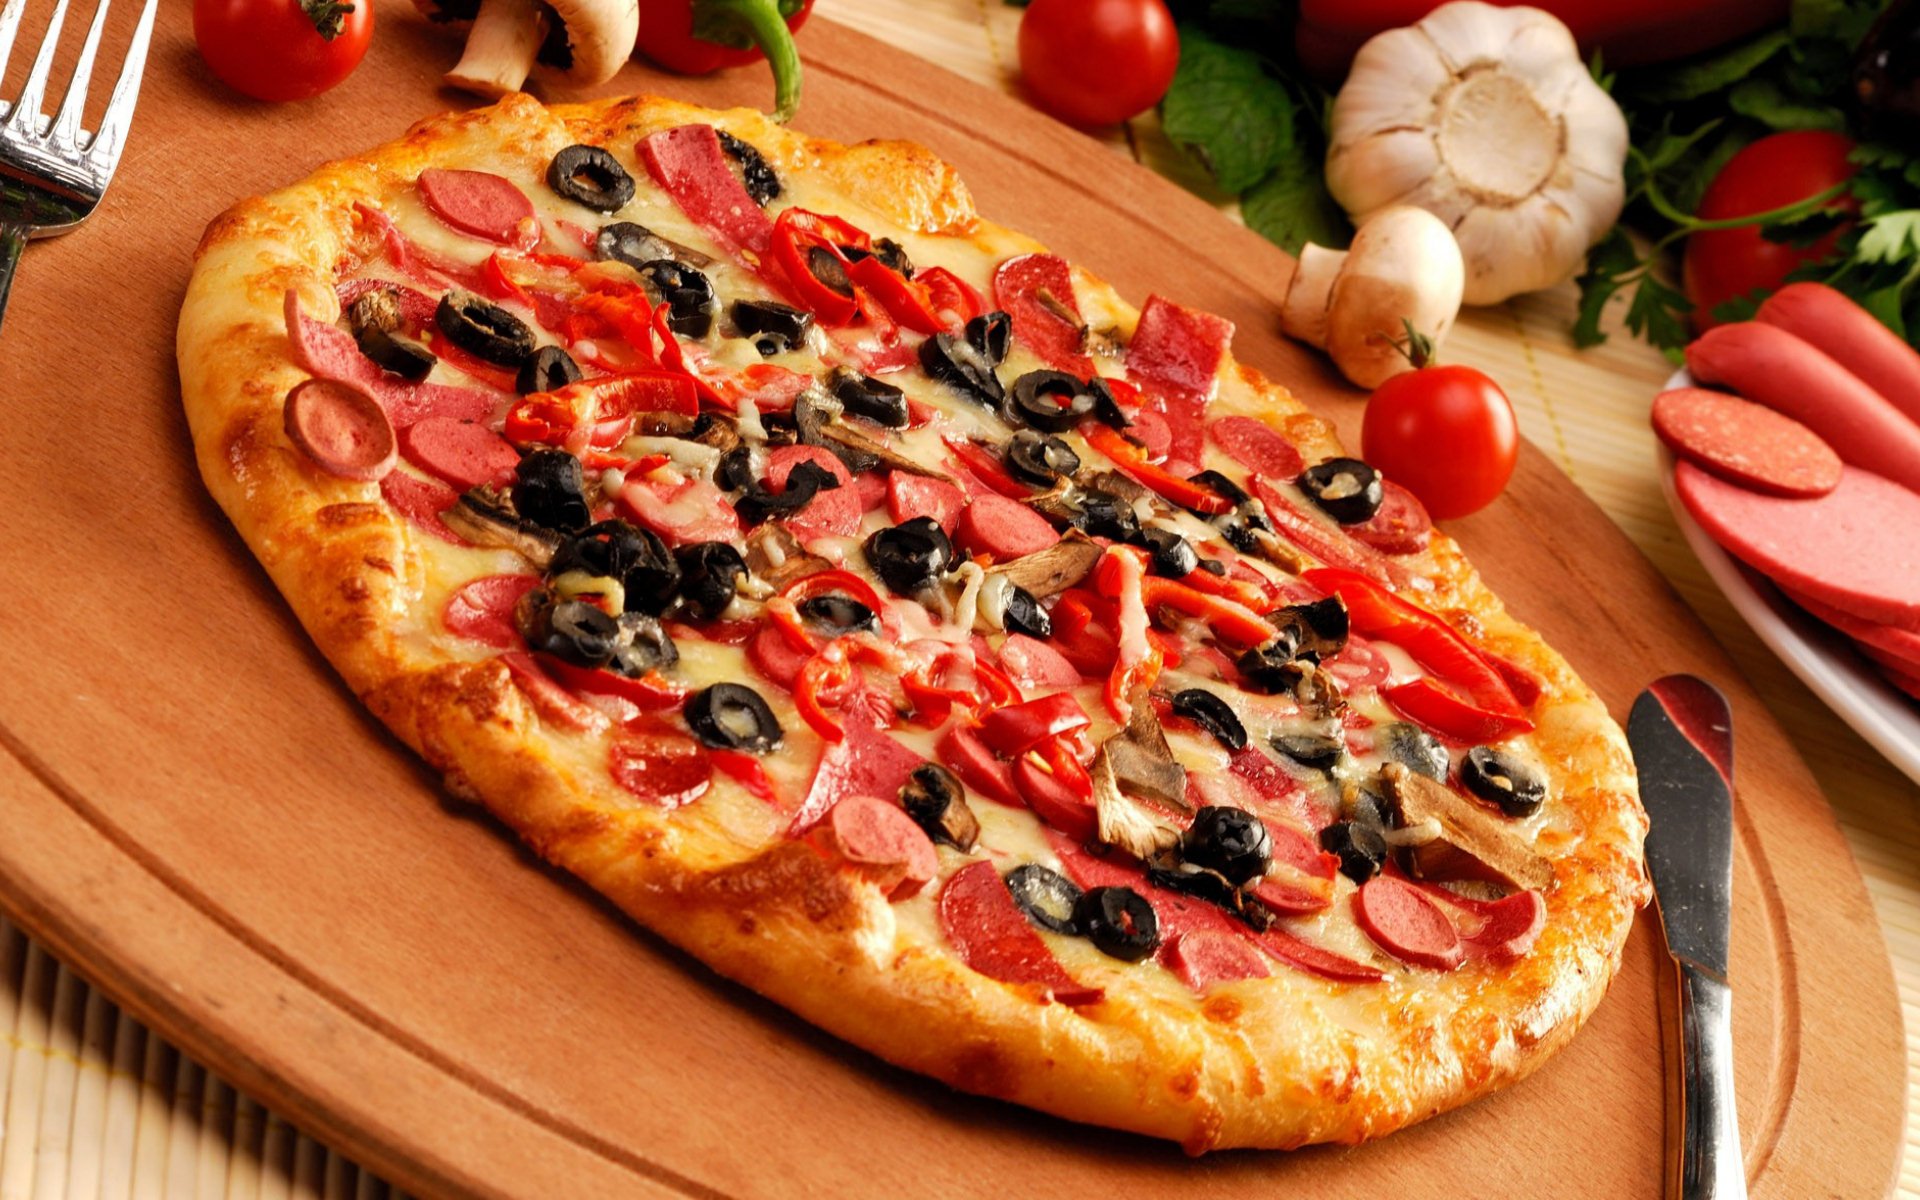 Image result for hd images of a pizza